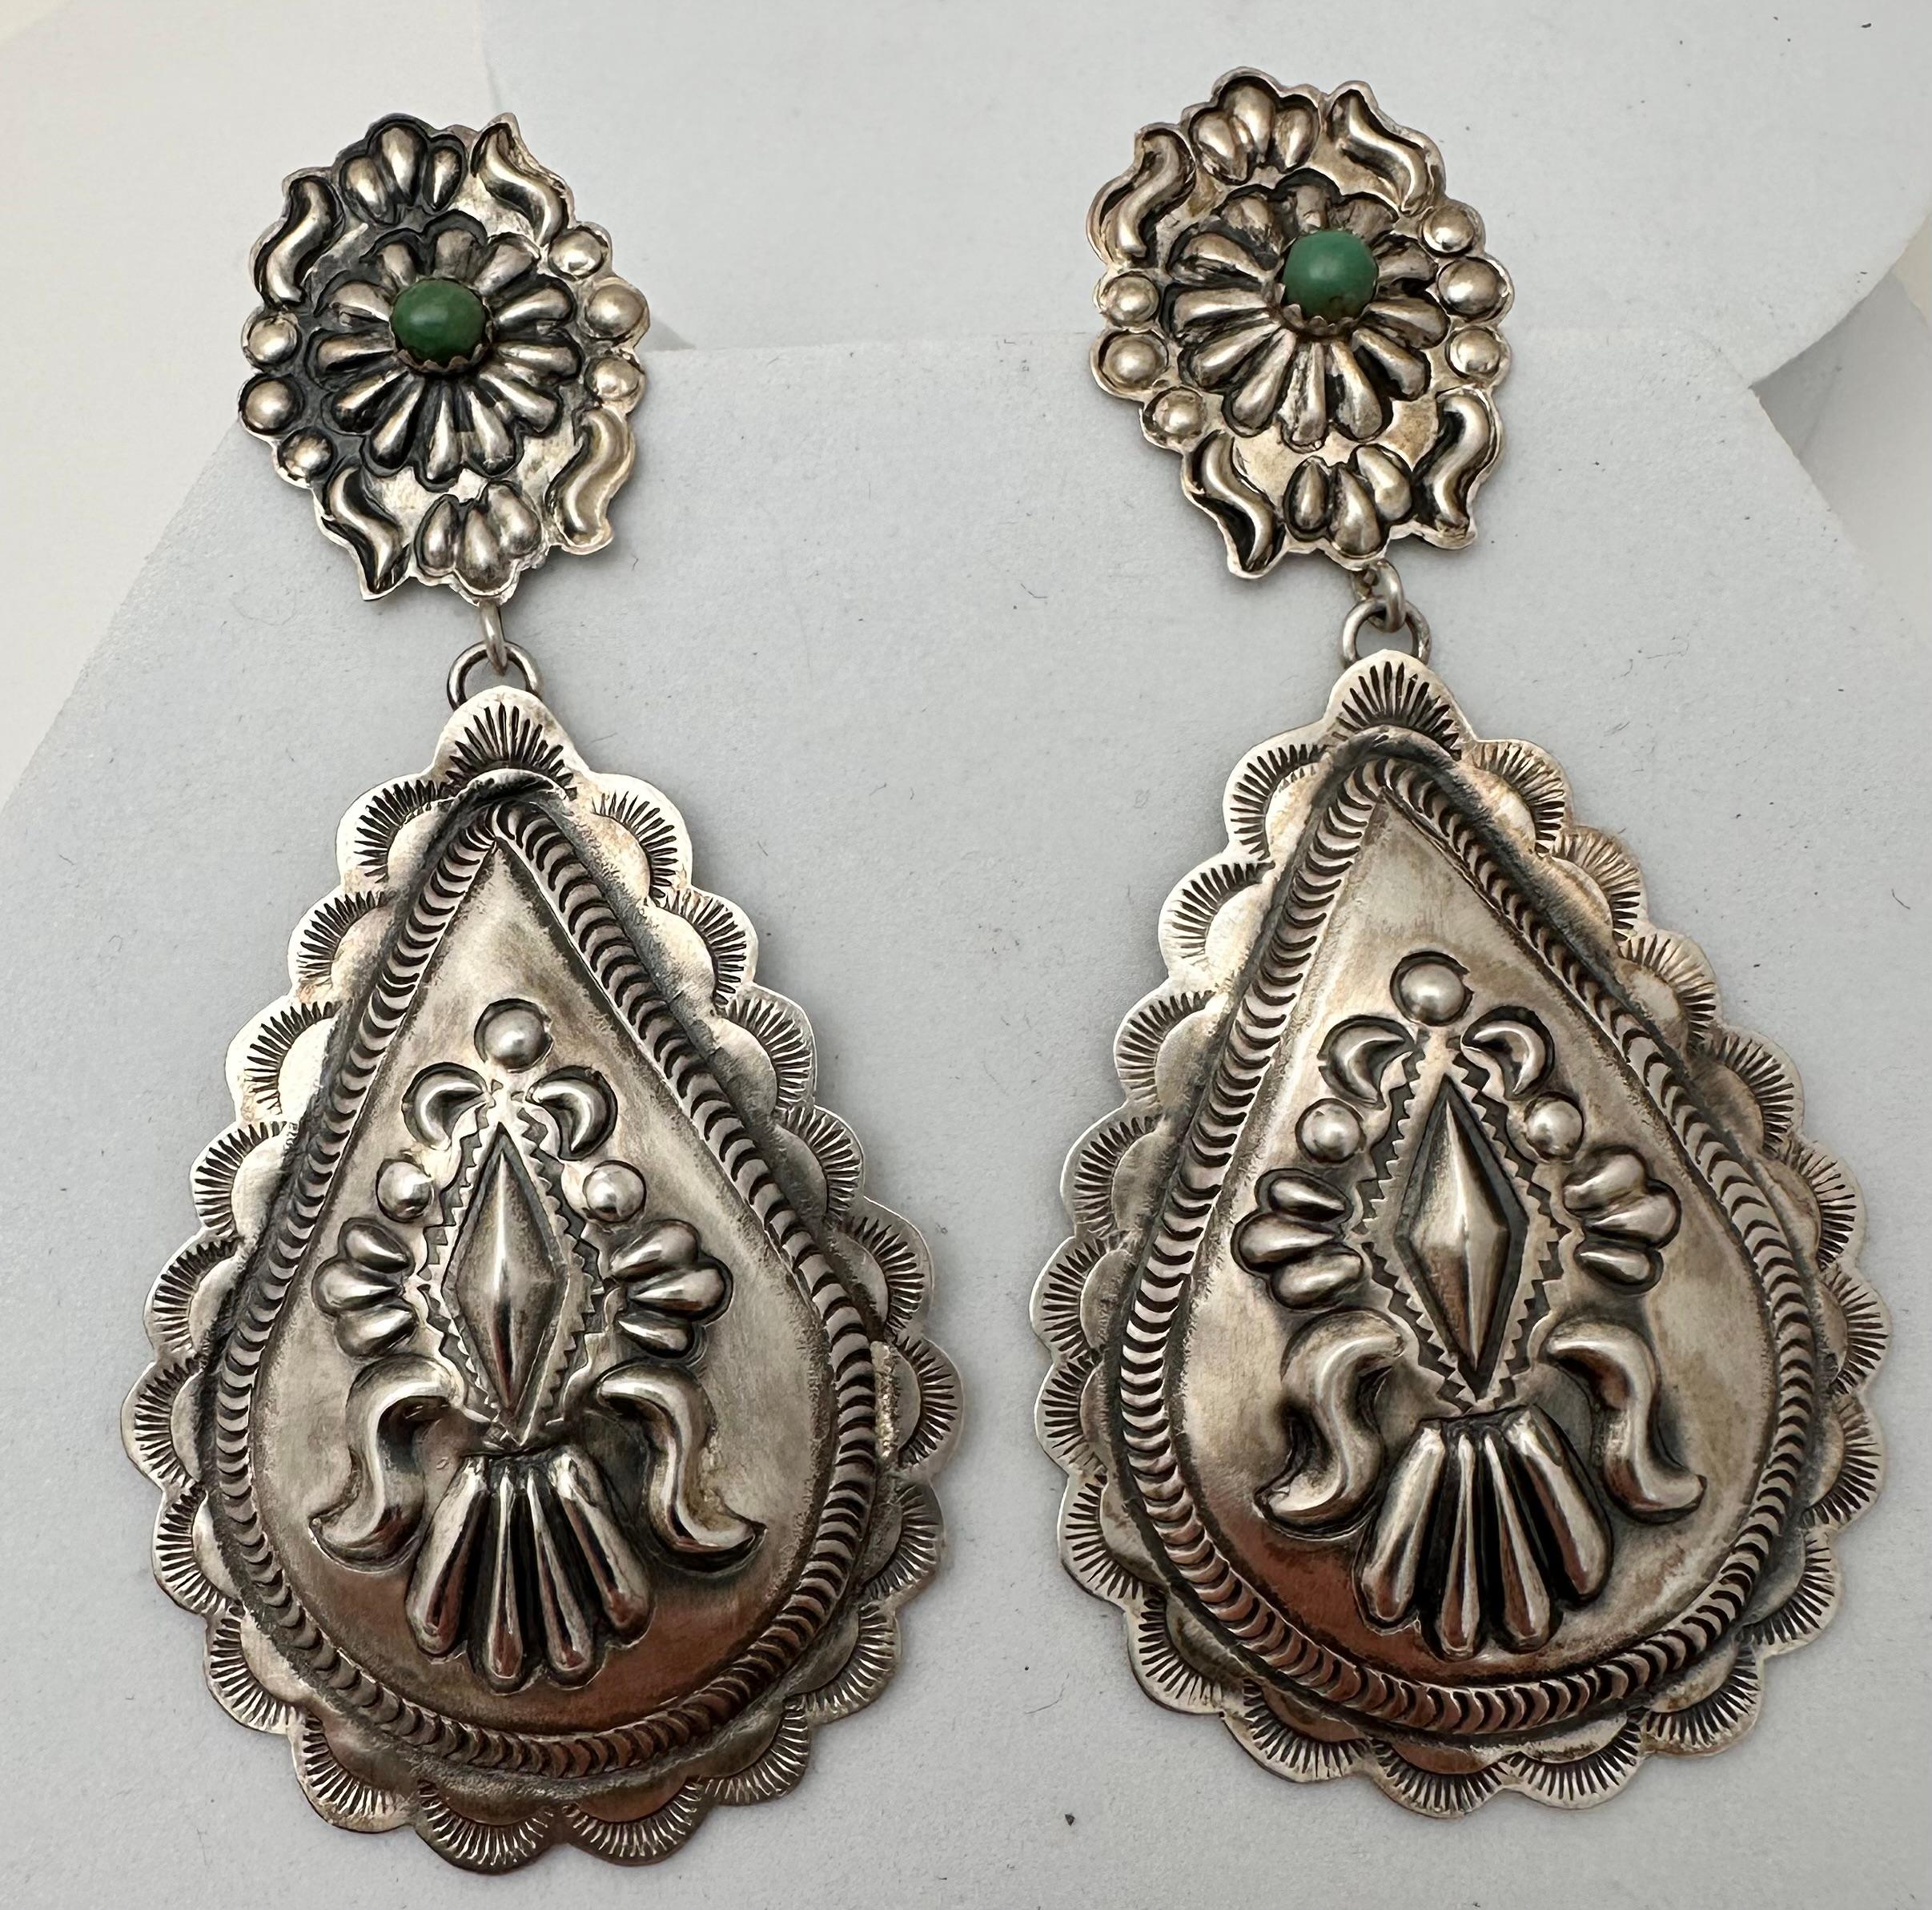 Navajo Sterling Silver .925 Repousse with 4mm Round Green Turquoise Set in Pear-Shaped Dangle Earrings 
Approximately 1.5